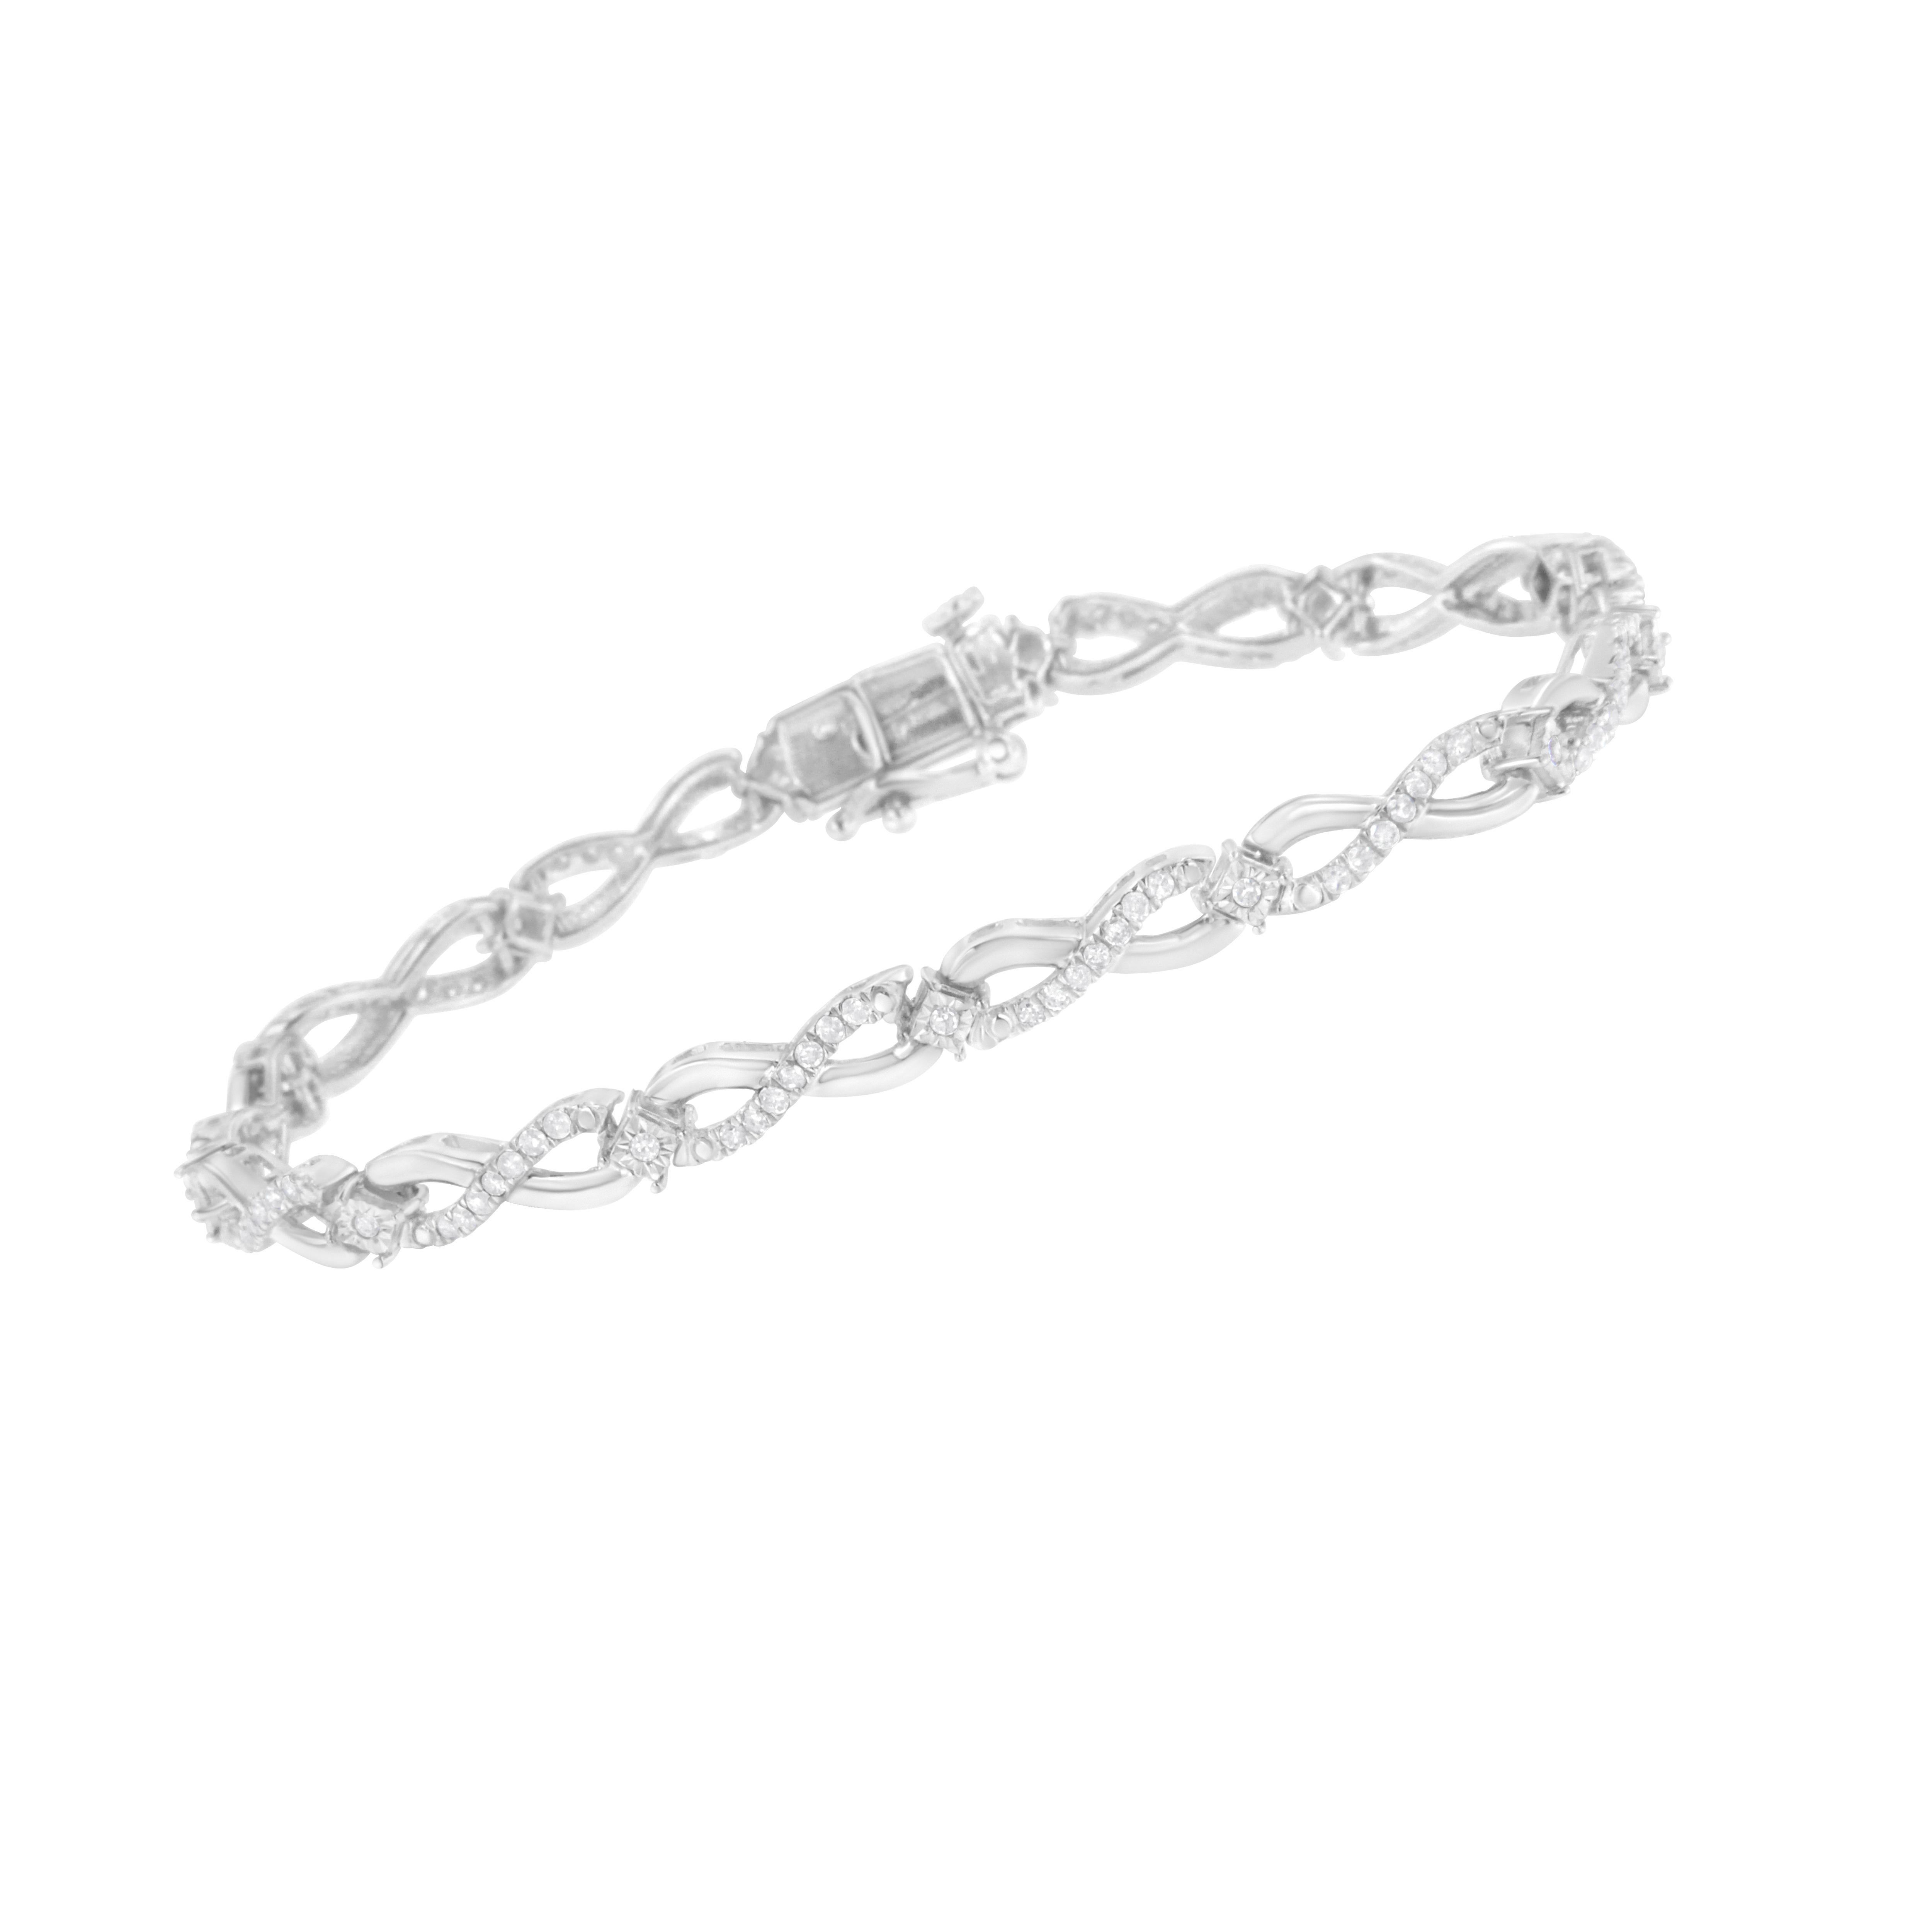 A hundred and three round cut diamonds weighing 1 ct TDW dazzle in this sterling silver bracelet. Soft ribbons loop around and create an infinity symbol. Twinkling round cut diamonds inlay one of the sides of the symbol. Individually set round cut